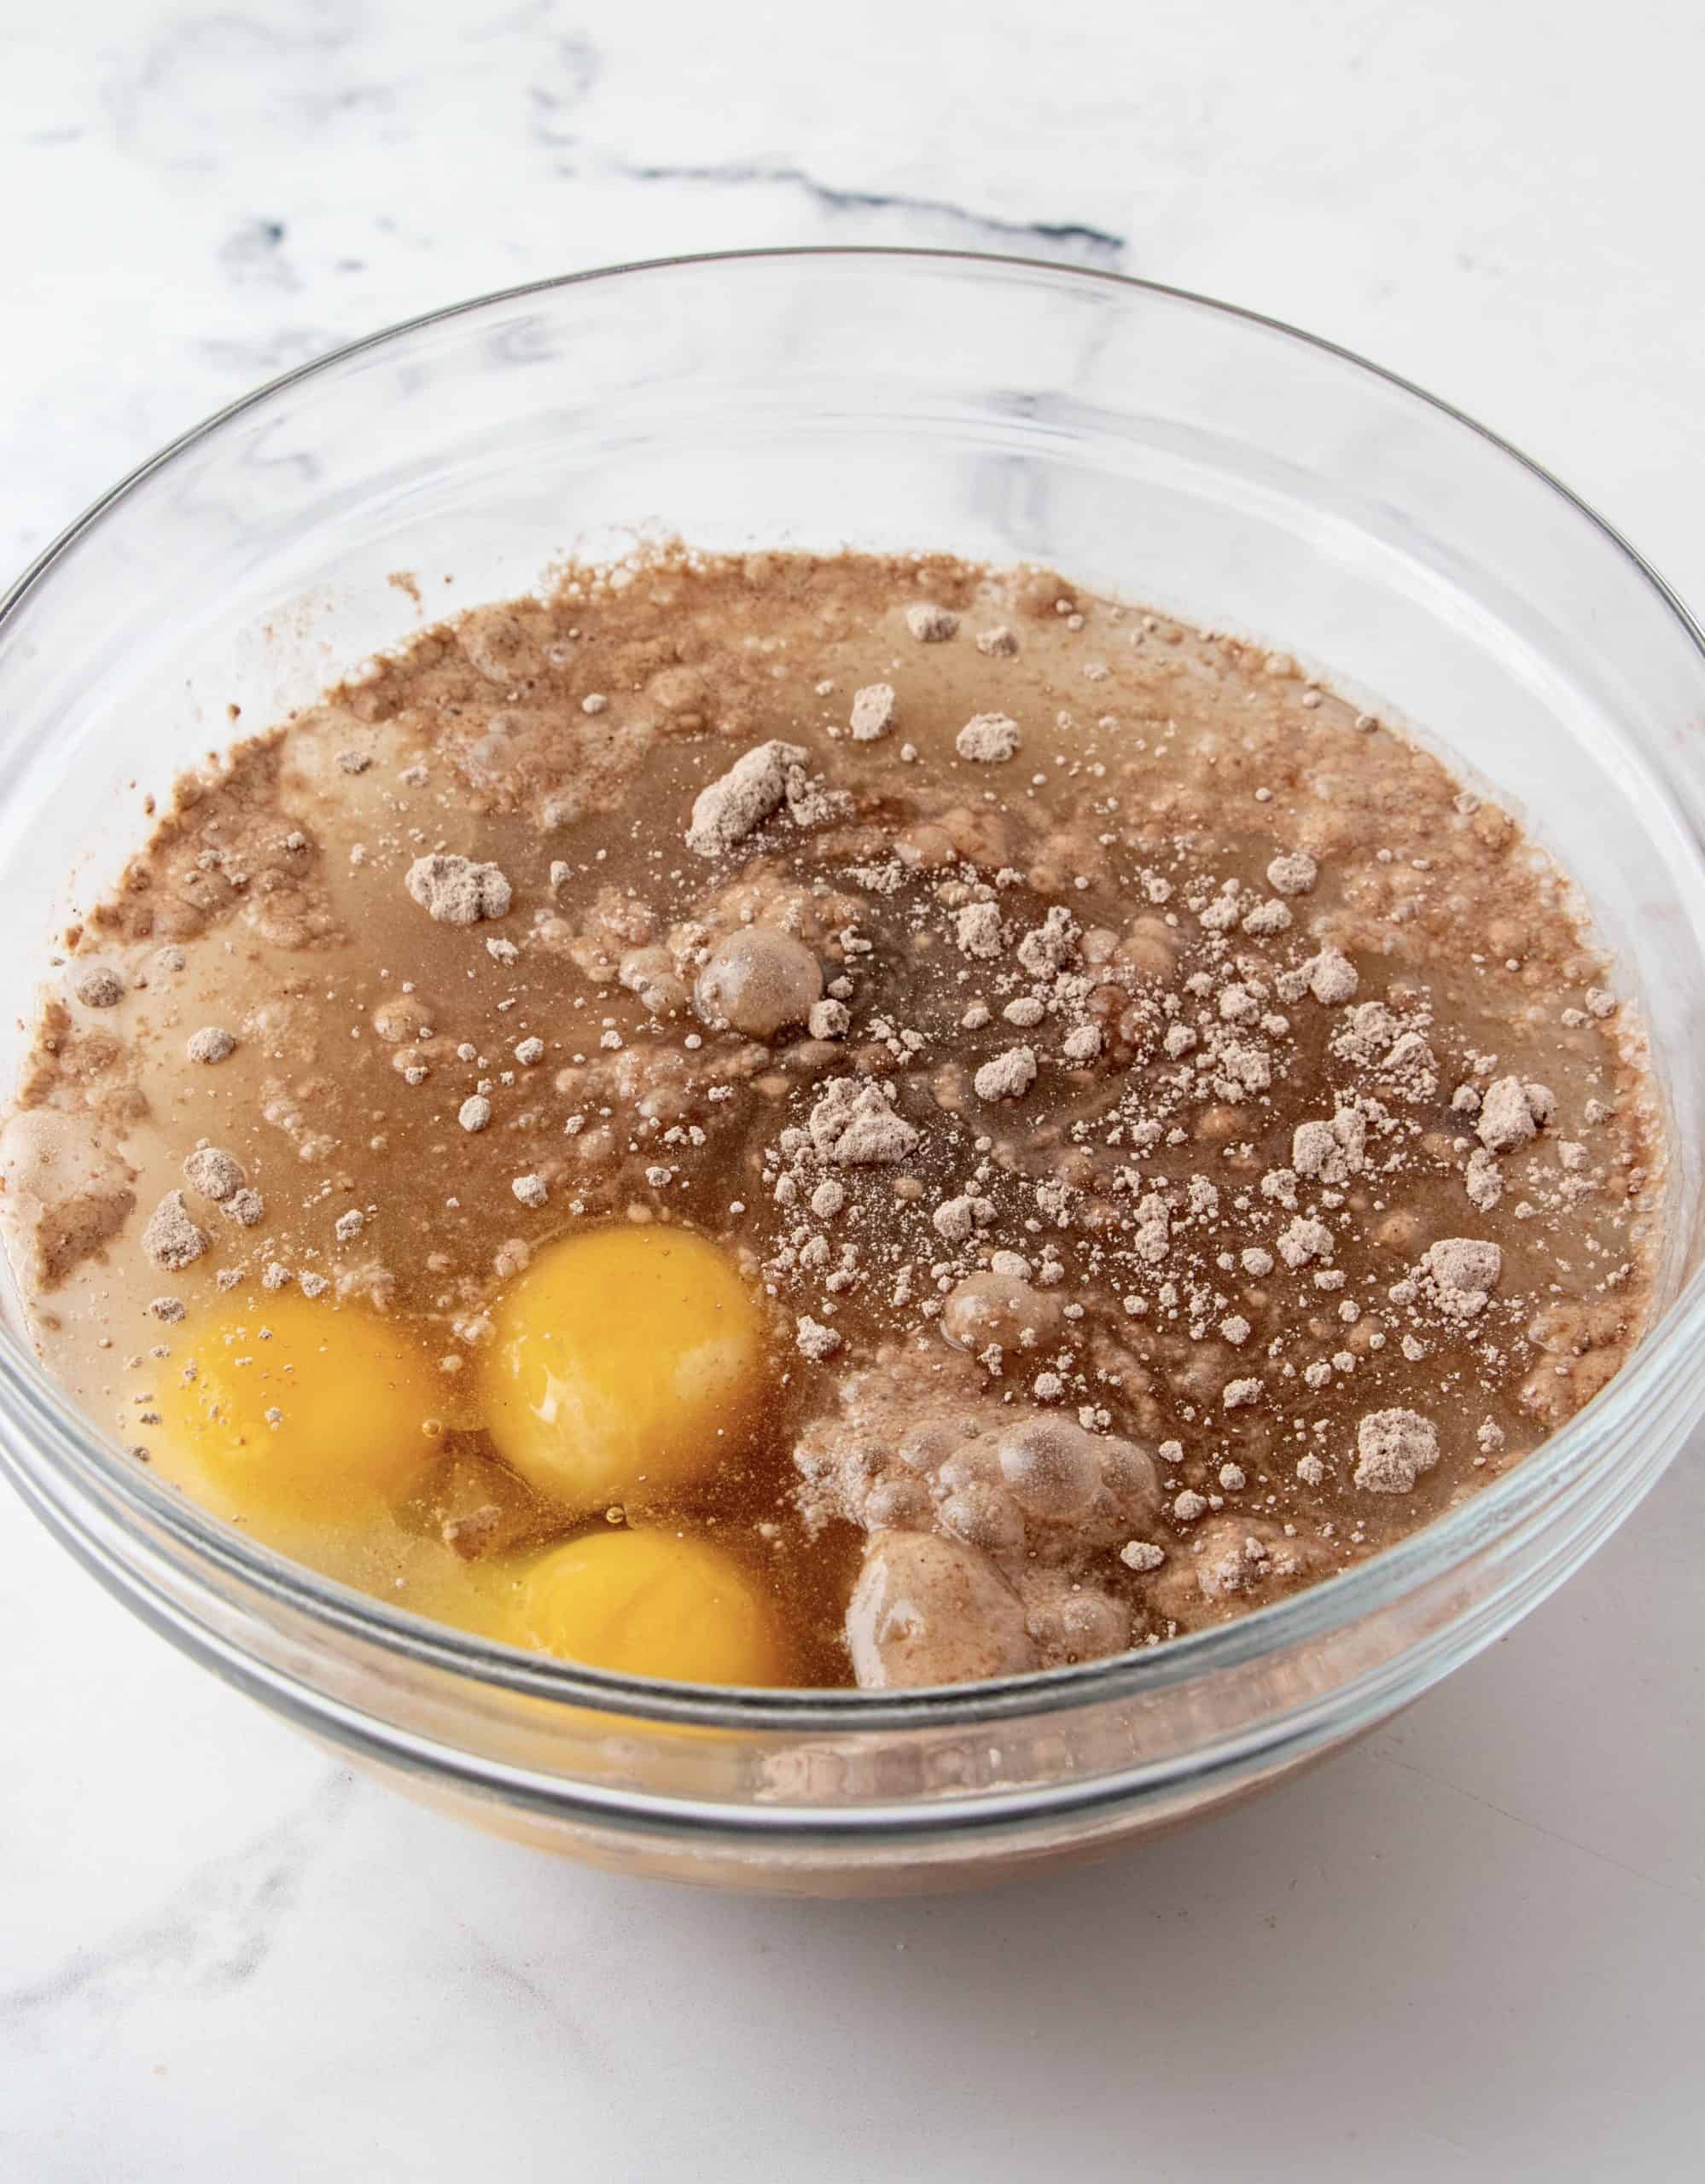 Cake mix, eggs, oil and water in bowl.